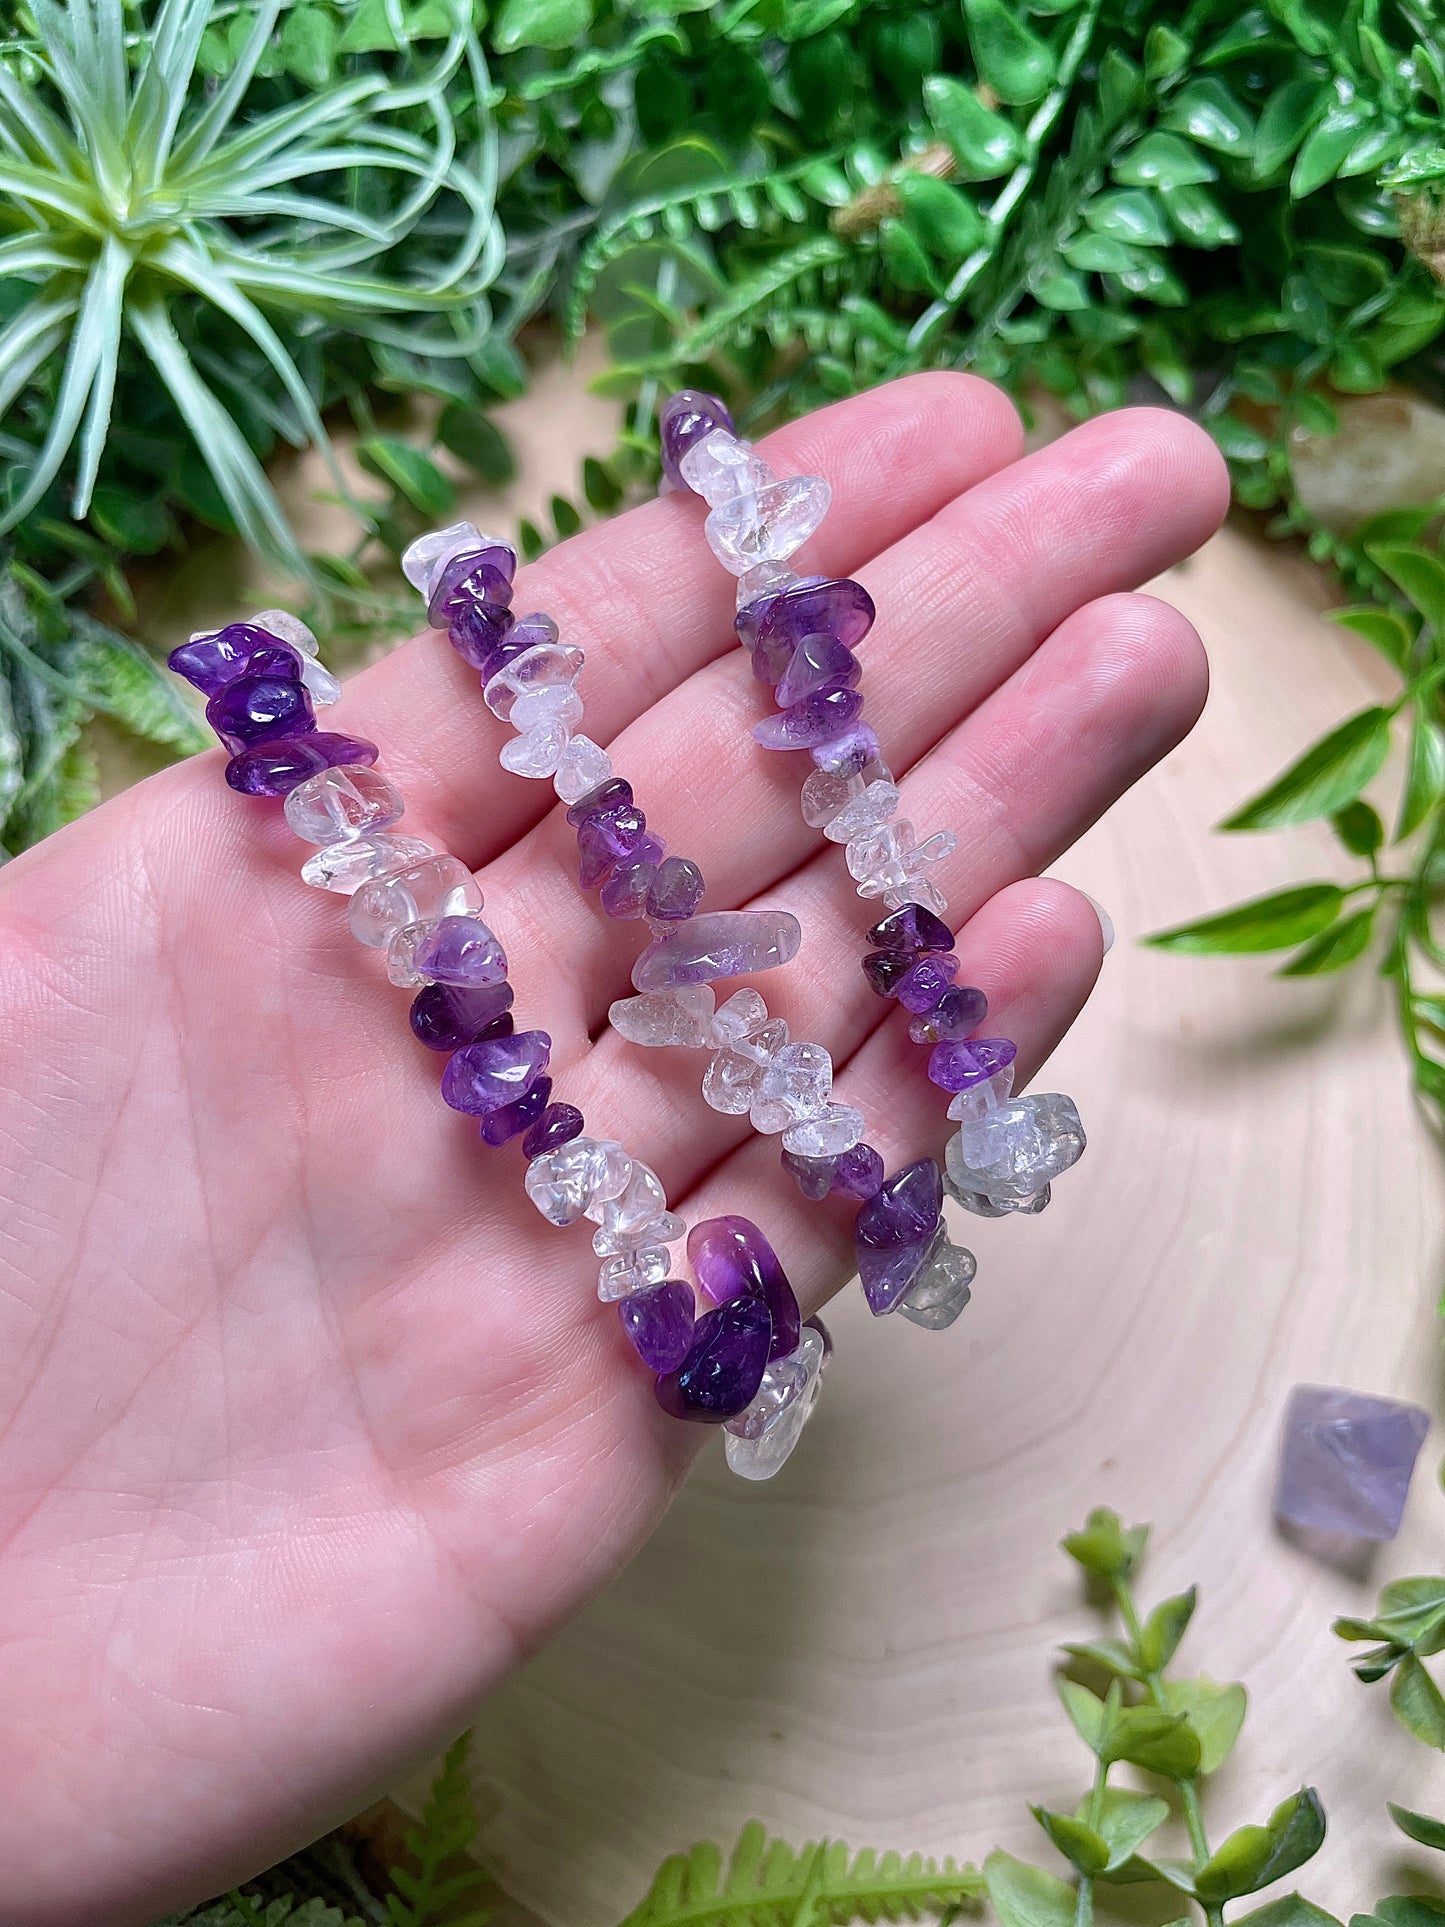 Calm and Clarity Chip Bracelet made with Amethyst and Clear Quartz